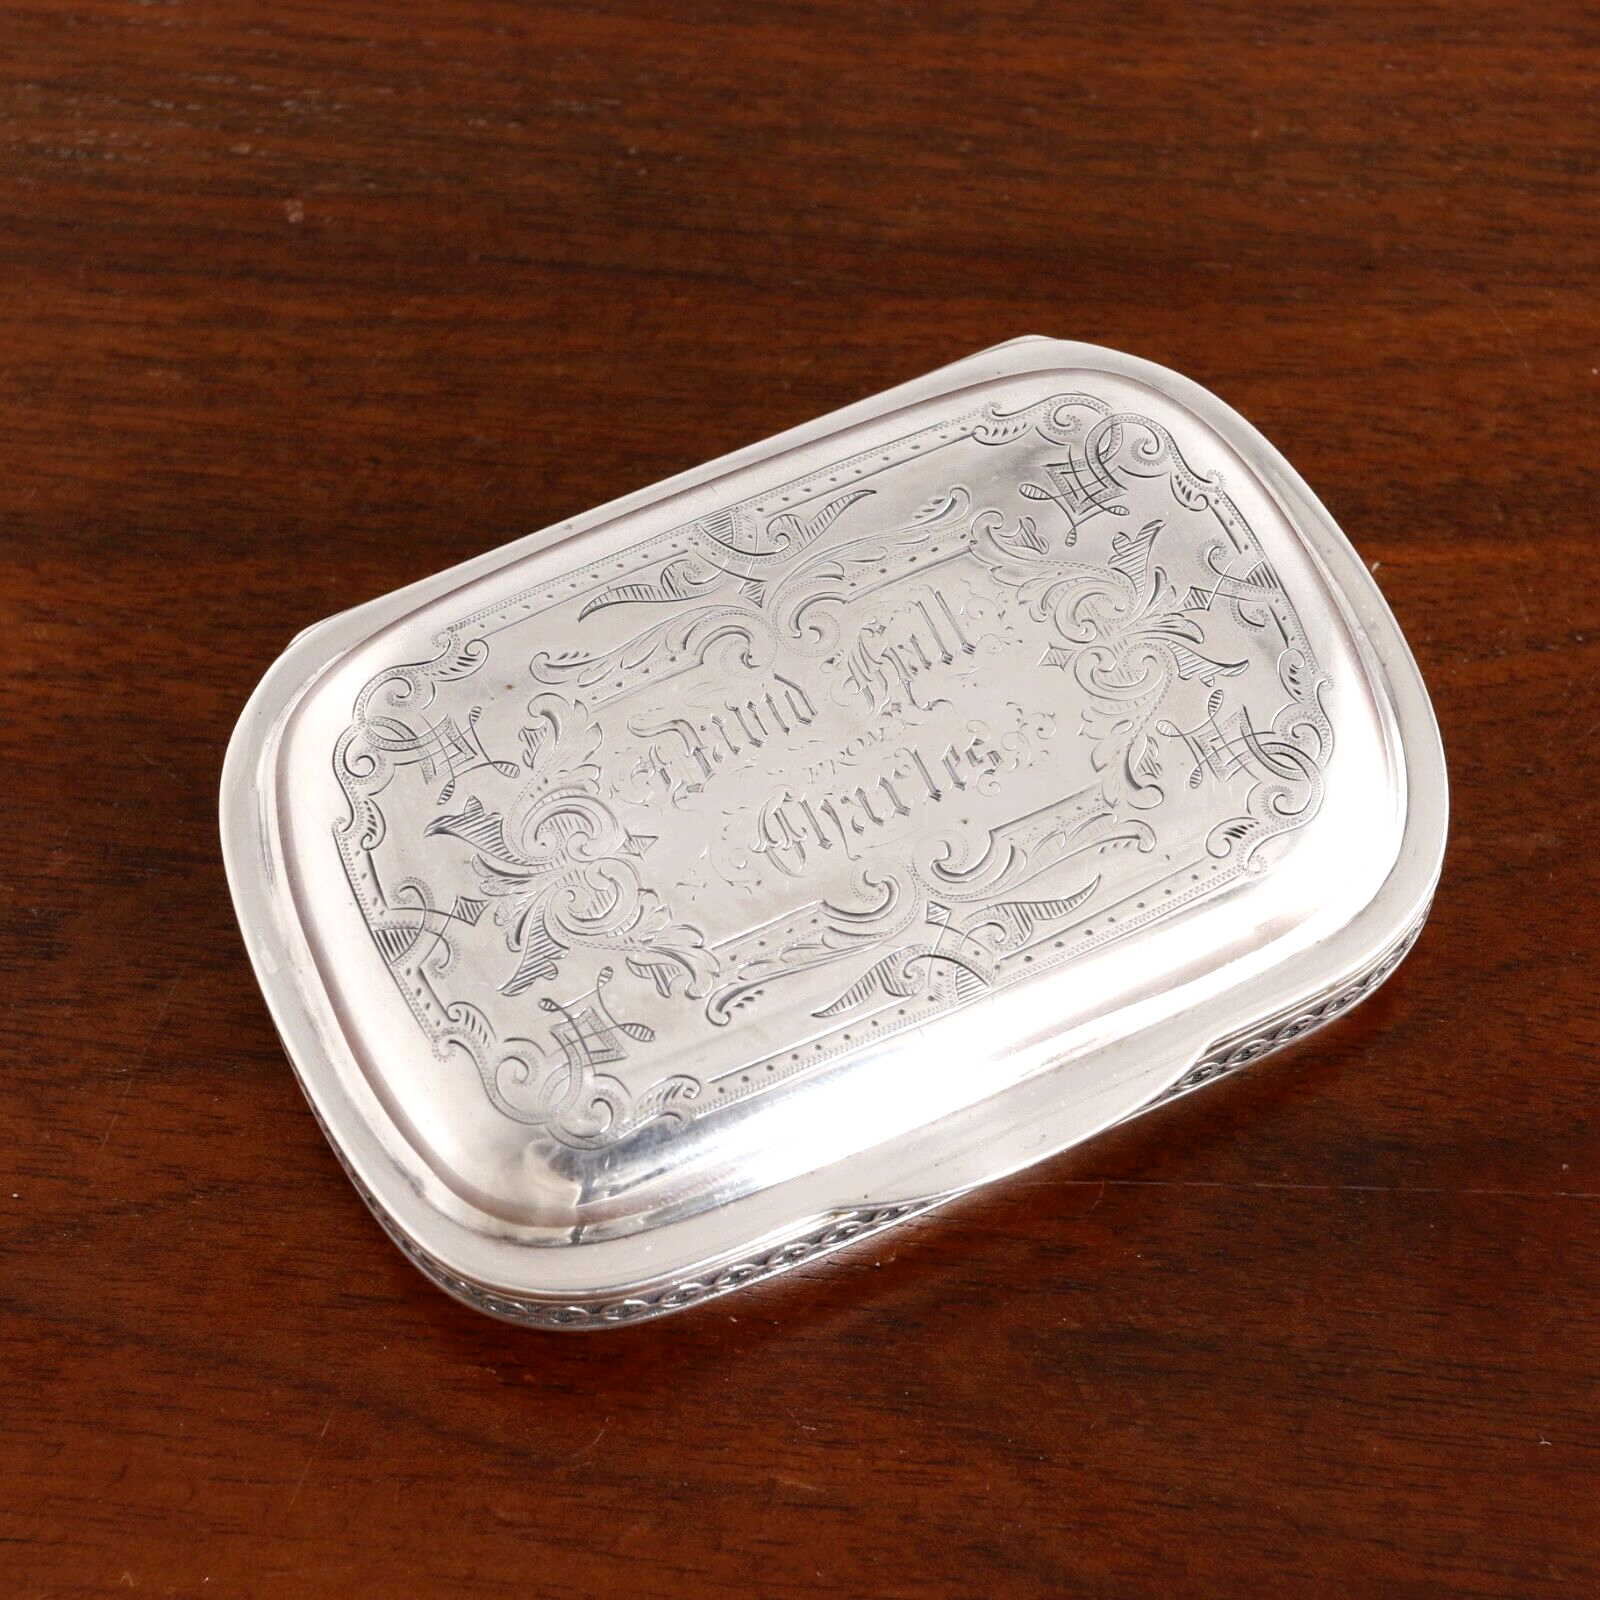 Antique Valuations: AMERICAN AESTHETIC COIN SILVER PARCEL GILT SNUFF BOX ELABORATELY ENGRAVED 1860S